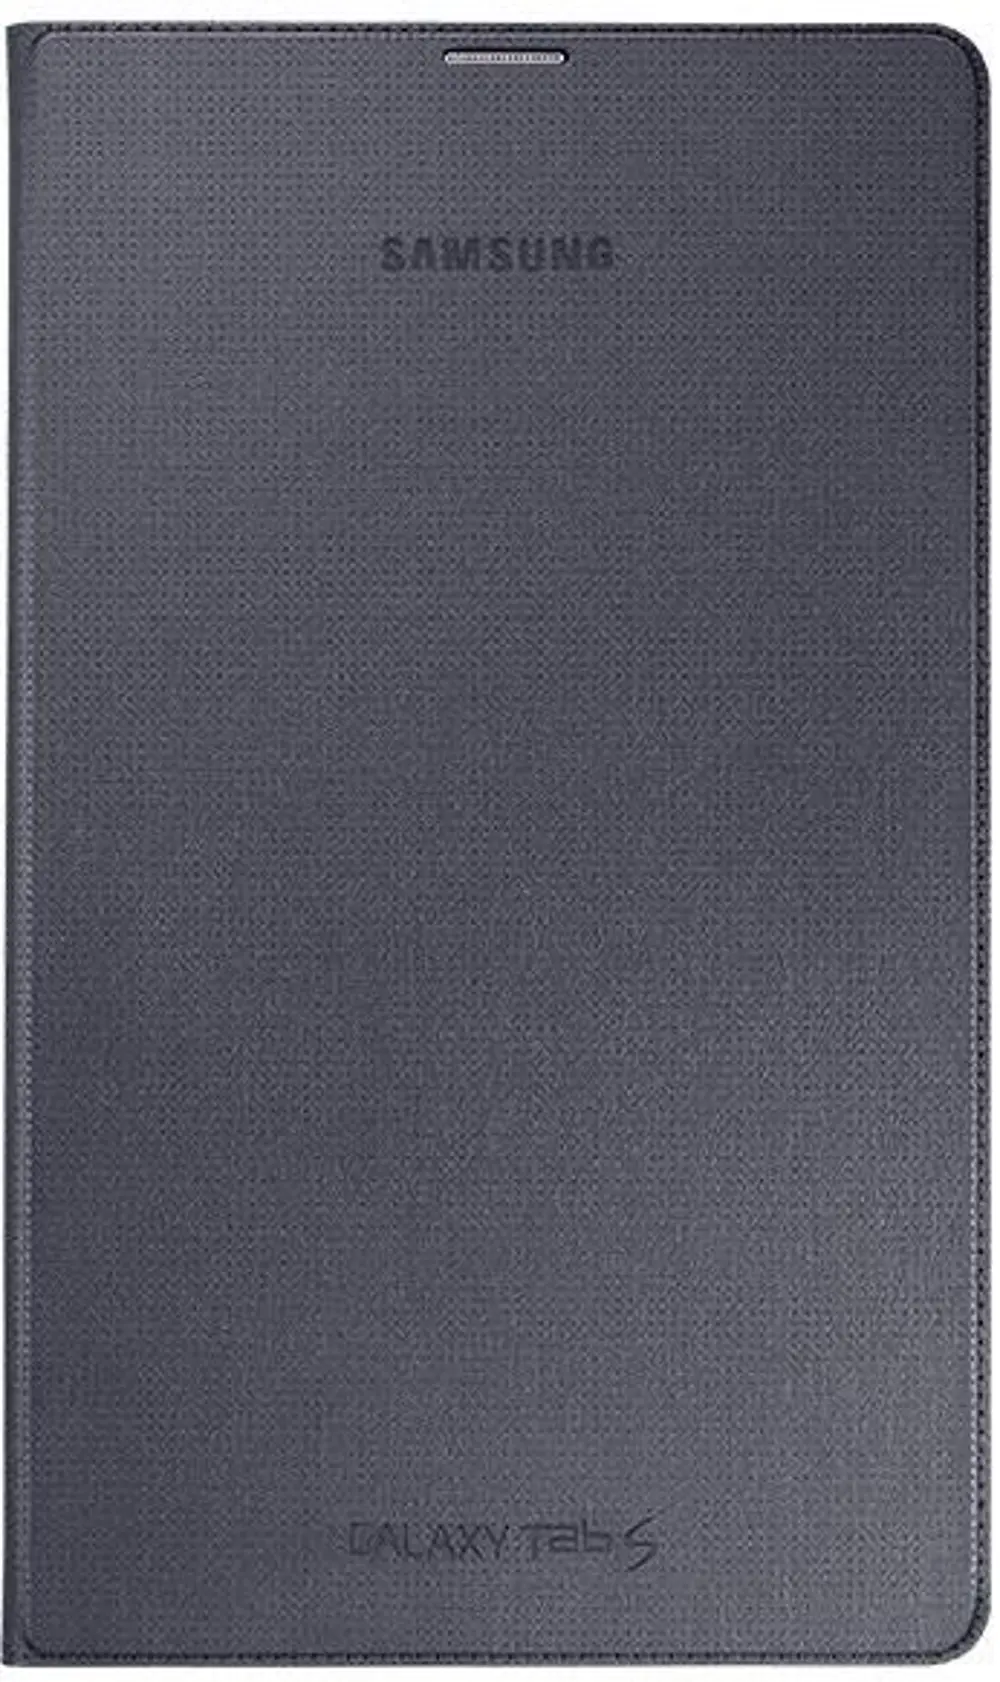 ET-DT700WBEGUJ Samsung Tab S 8.4 Inch Simple Cover - Charcoal Black-1